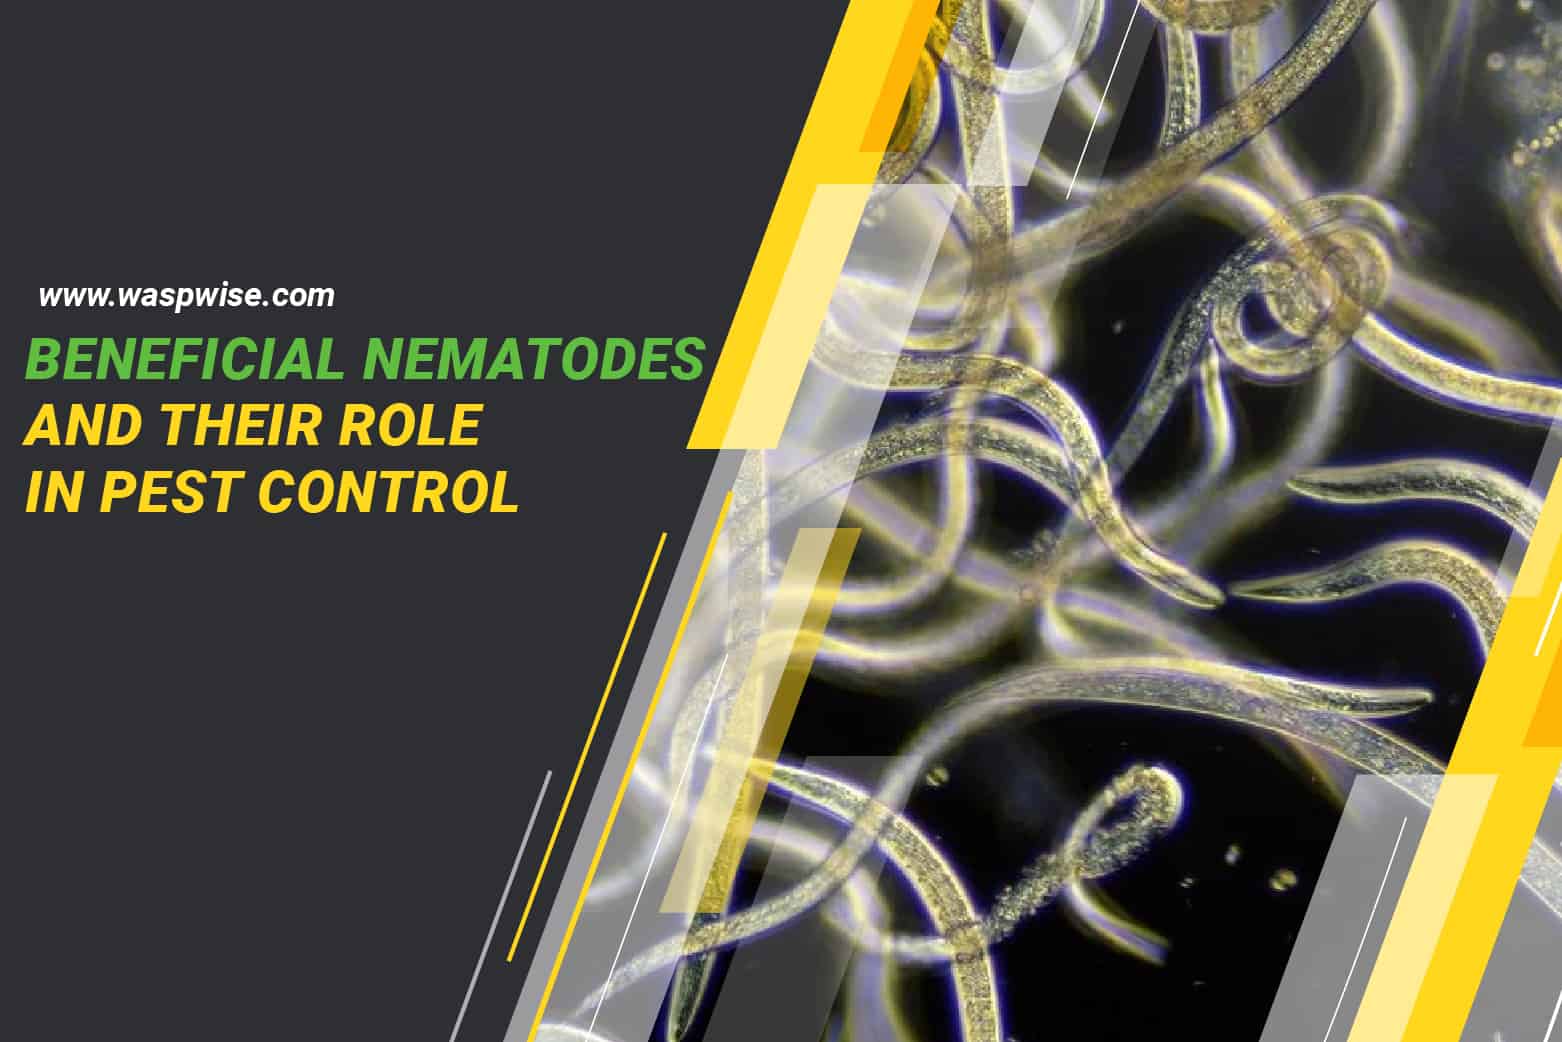 BENEFICIAL NEMATODES AND THEIR ROLE IN PEST CONTROL